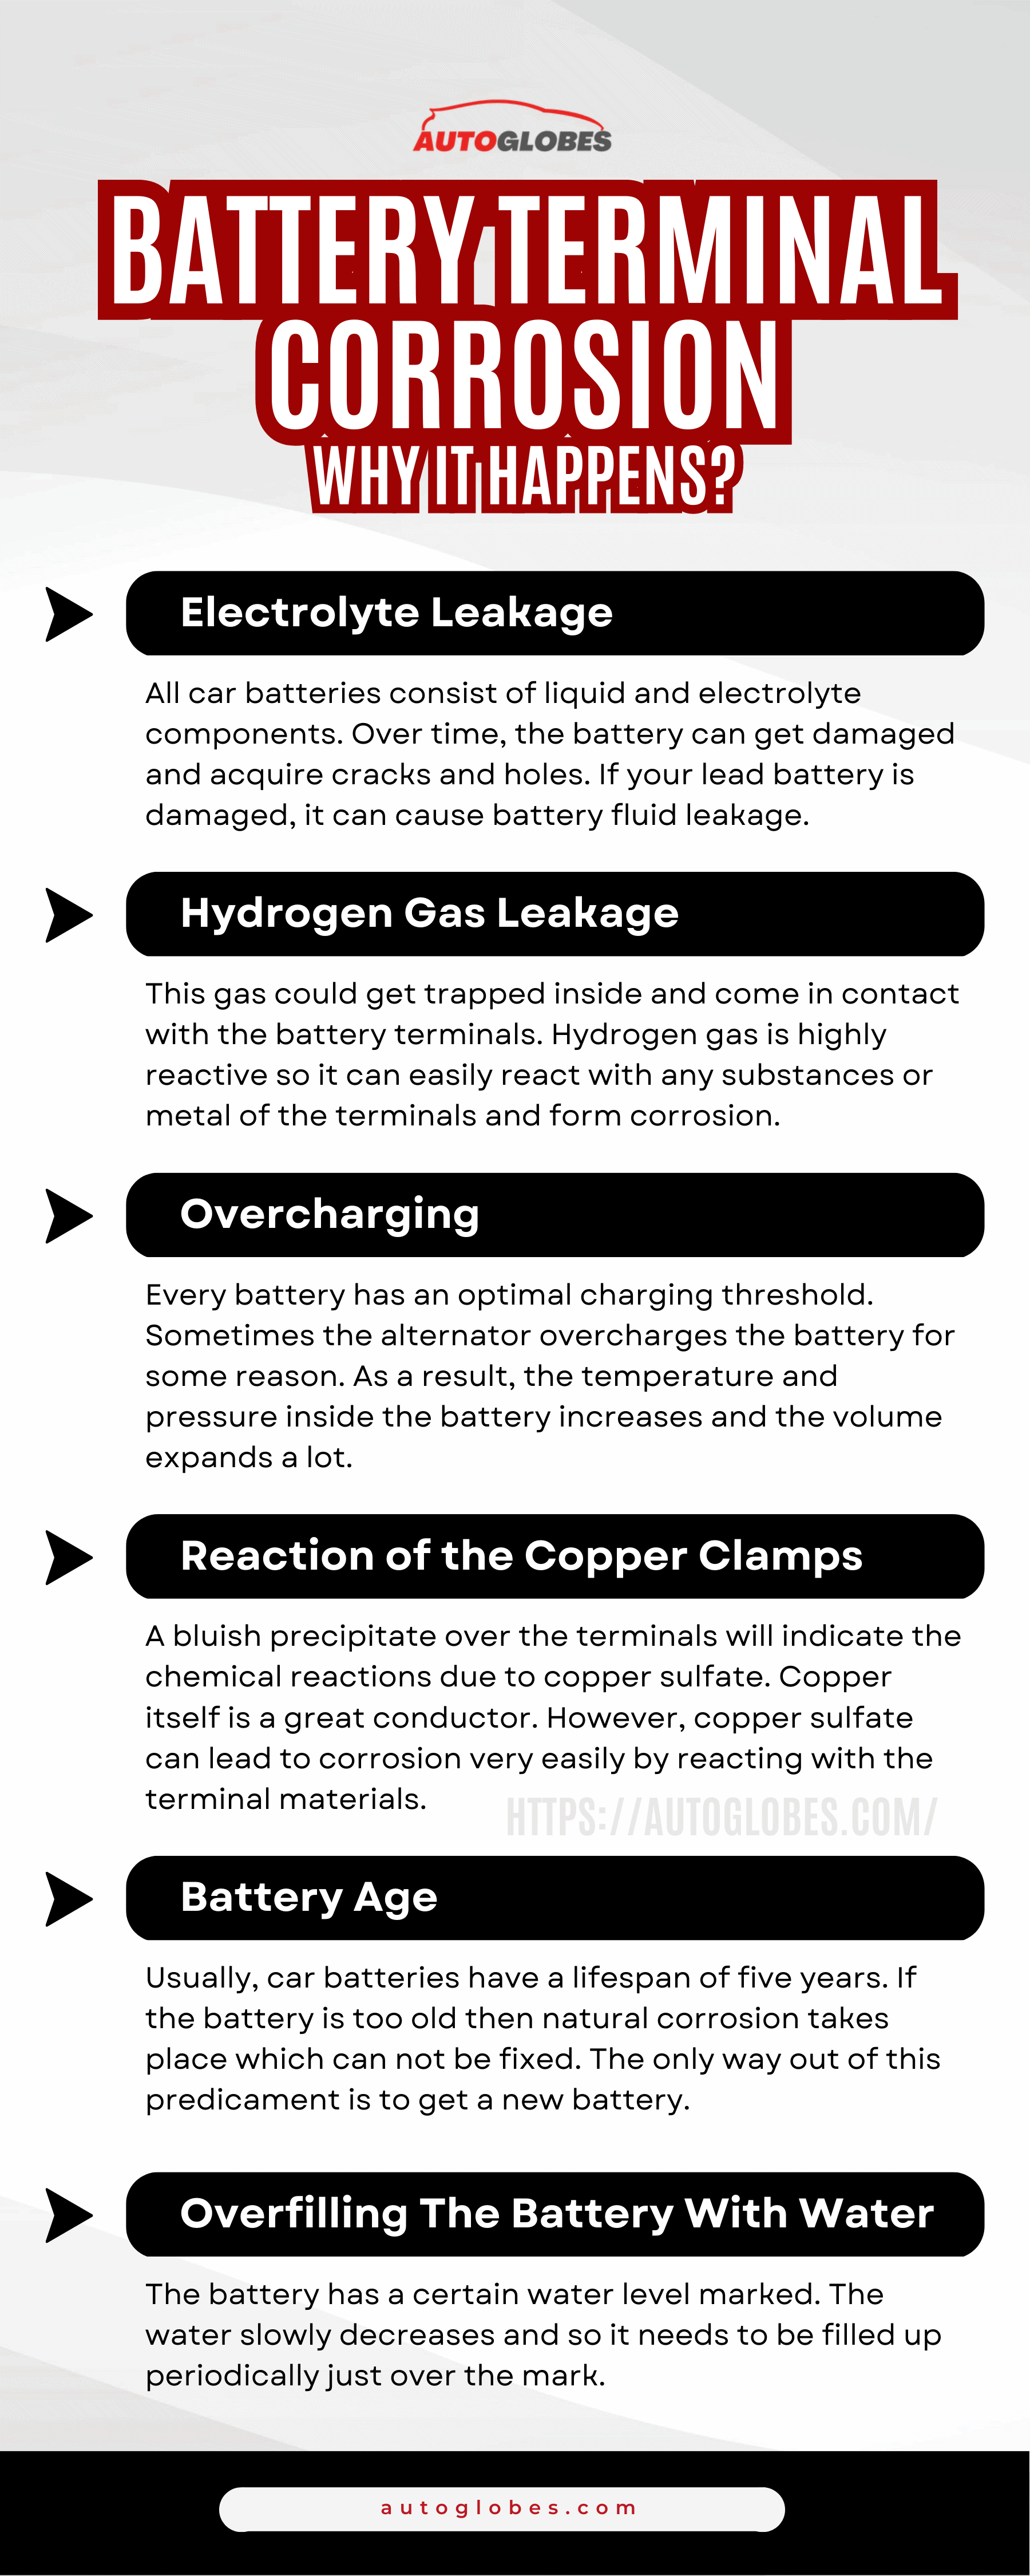 Battery Terminal Corrosion Infographic